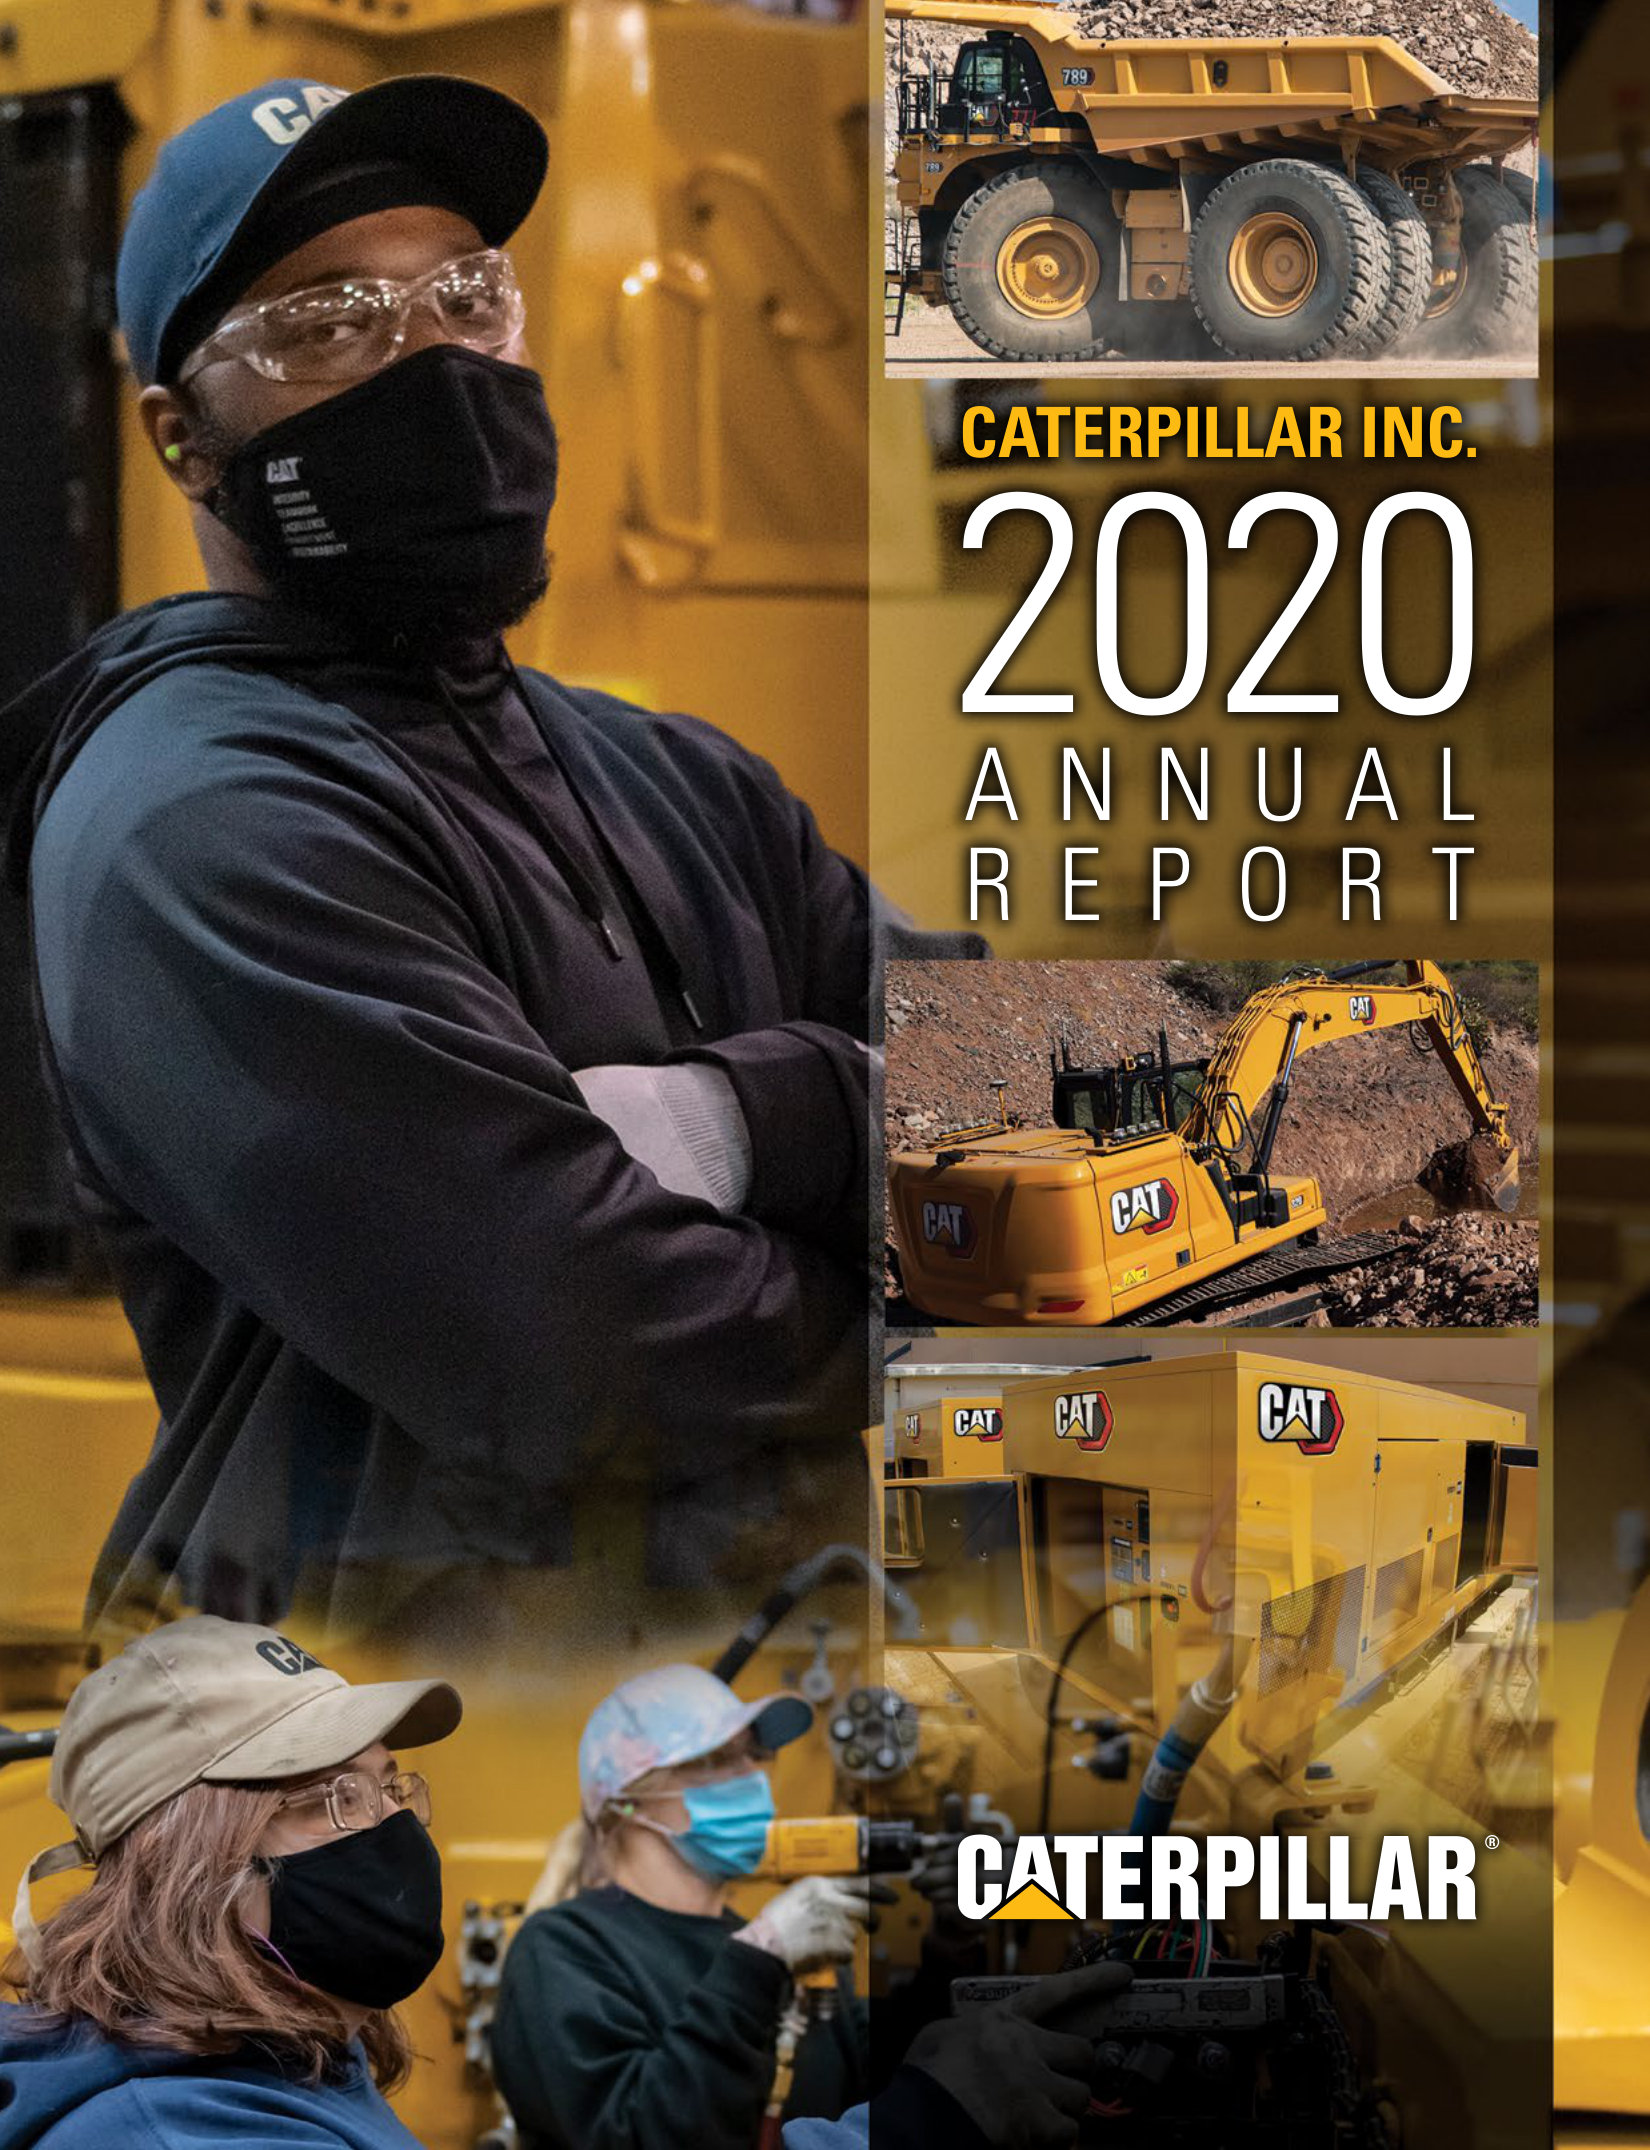 LACP 2020/21 Vision Awards Annual Report Competition Caterpillar Inc